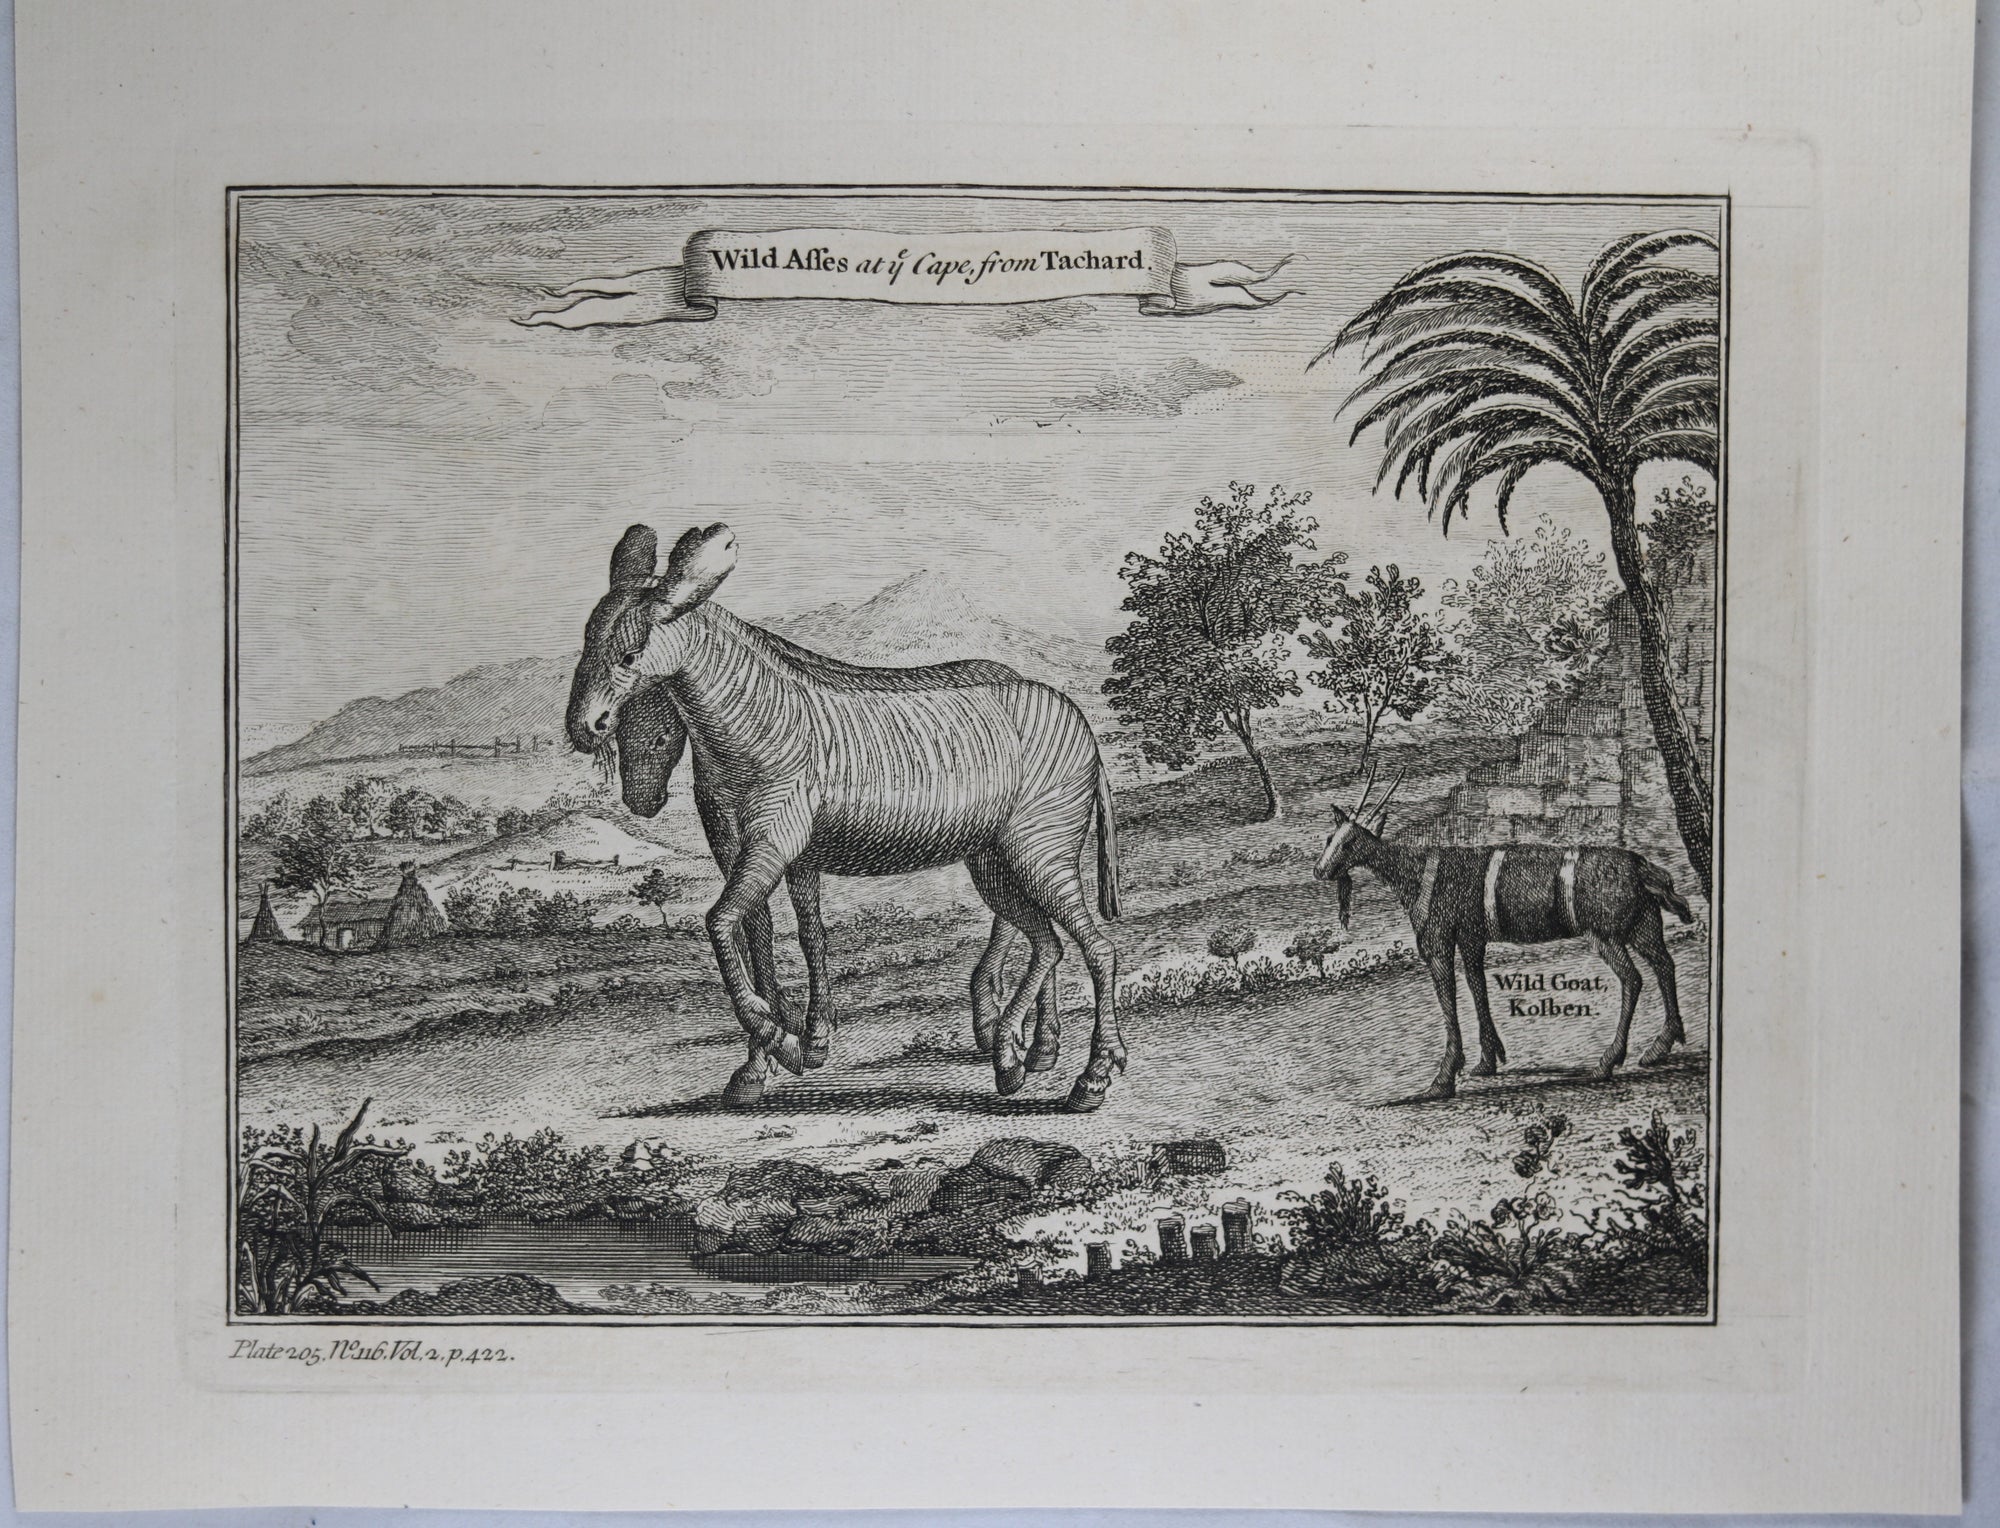 1745 engraving Wild Zebras at Cape of Good Hope (Africa)